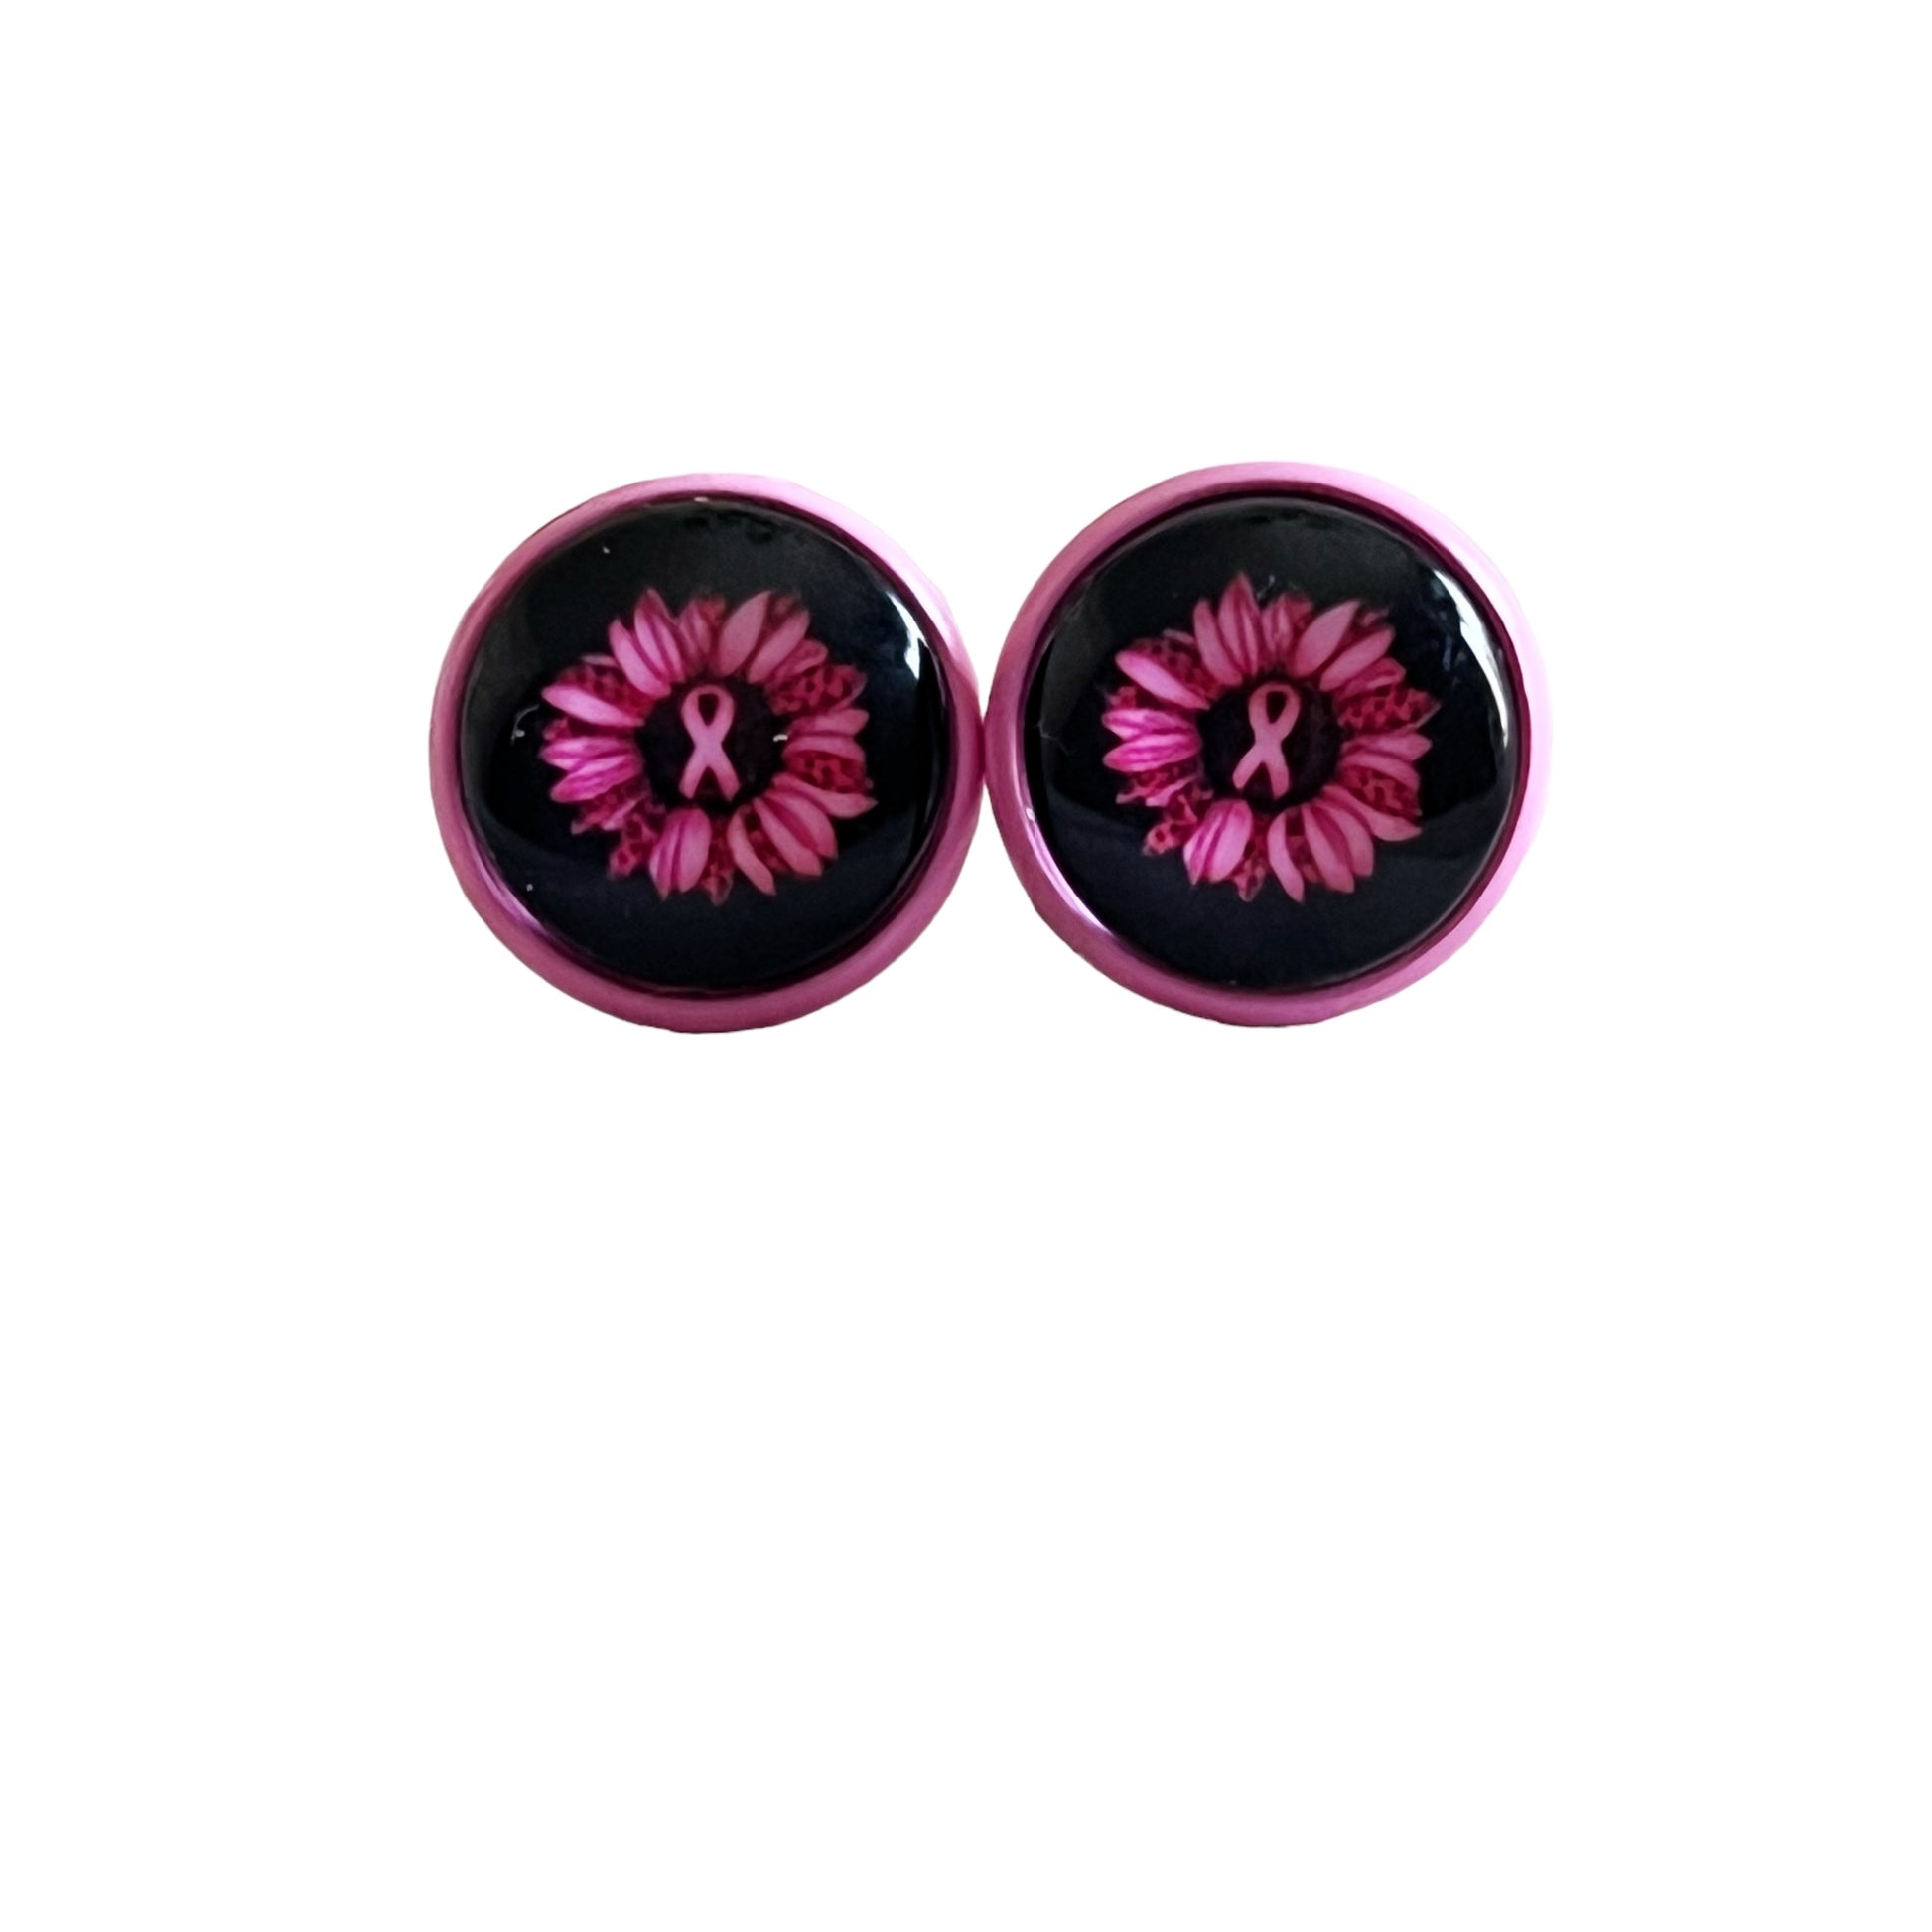 Breast Cancer Awareness Pink Sunflower Stud Earrings - Stylish and Supportive Accessories